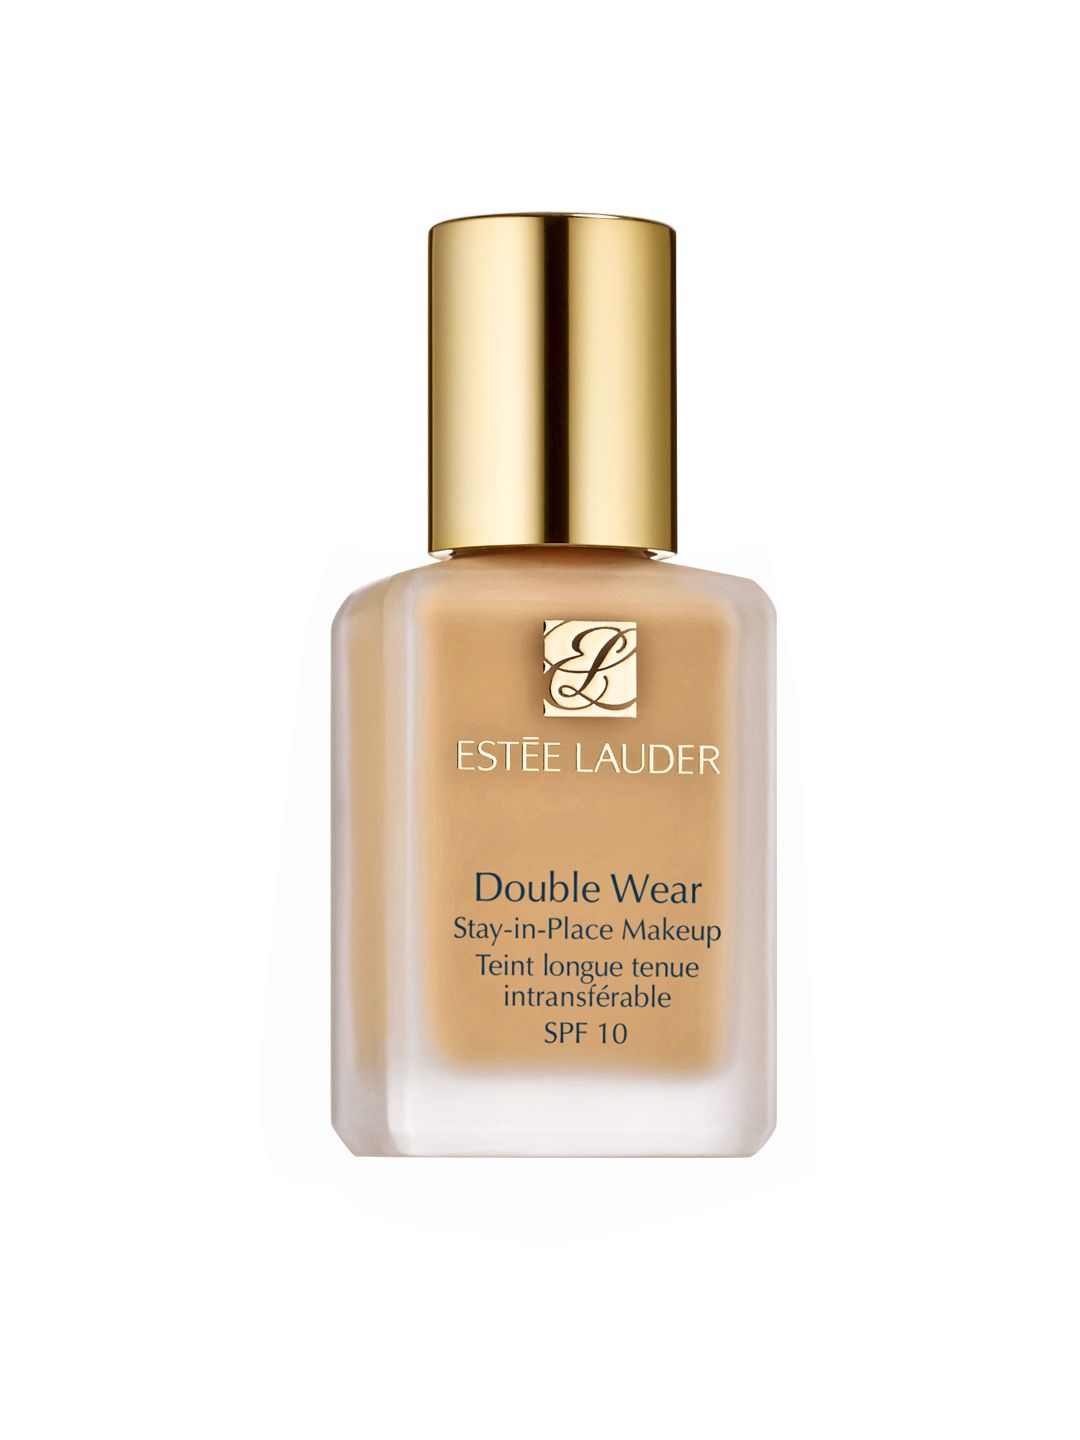 Estee Lauder Double Wear Stay-in-Place Makeup Foundation with SPF 10 - Ivory Nude 30ml Price in India